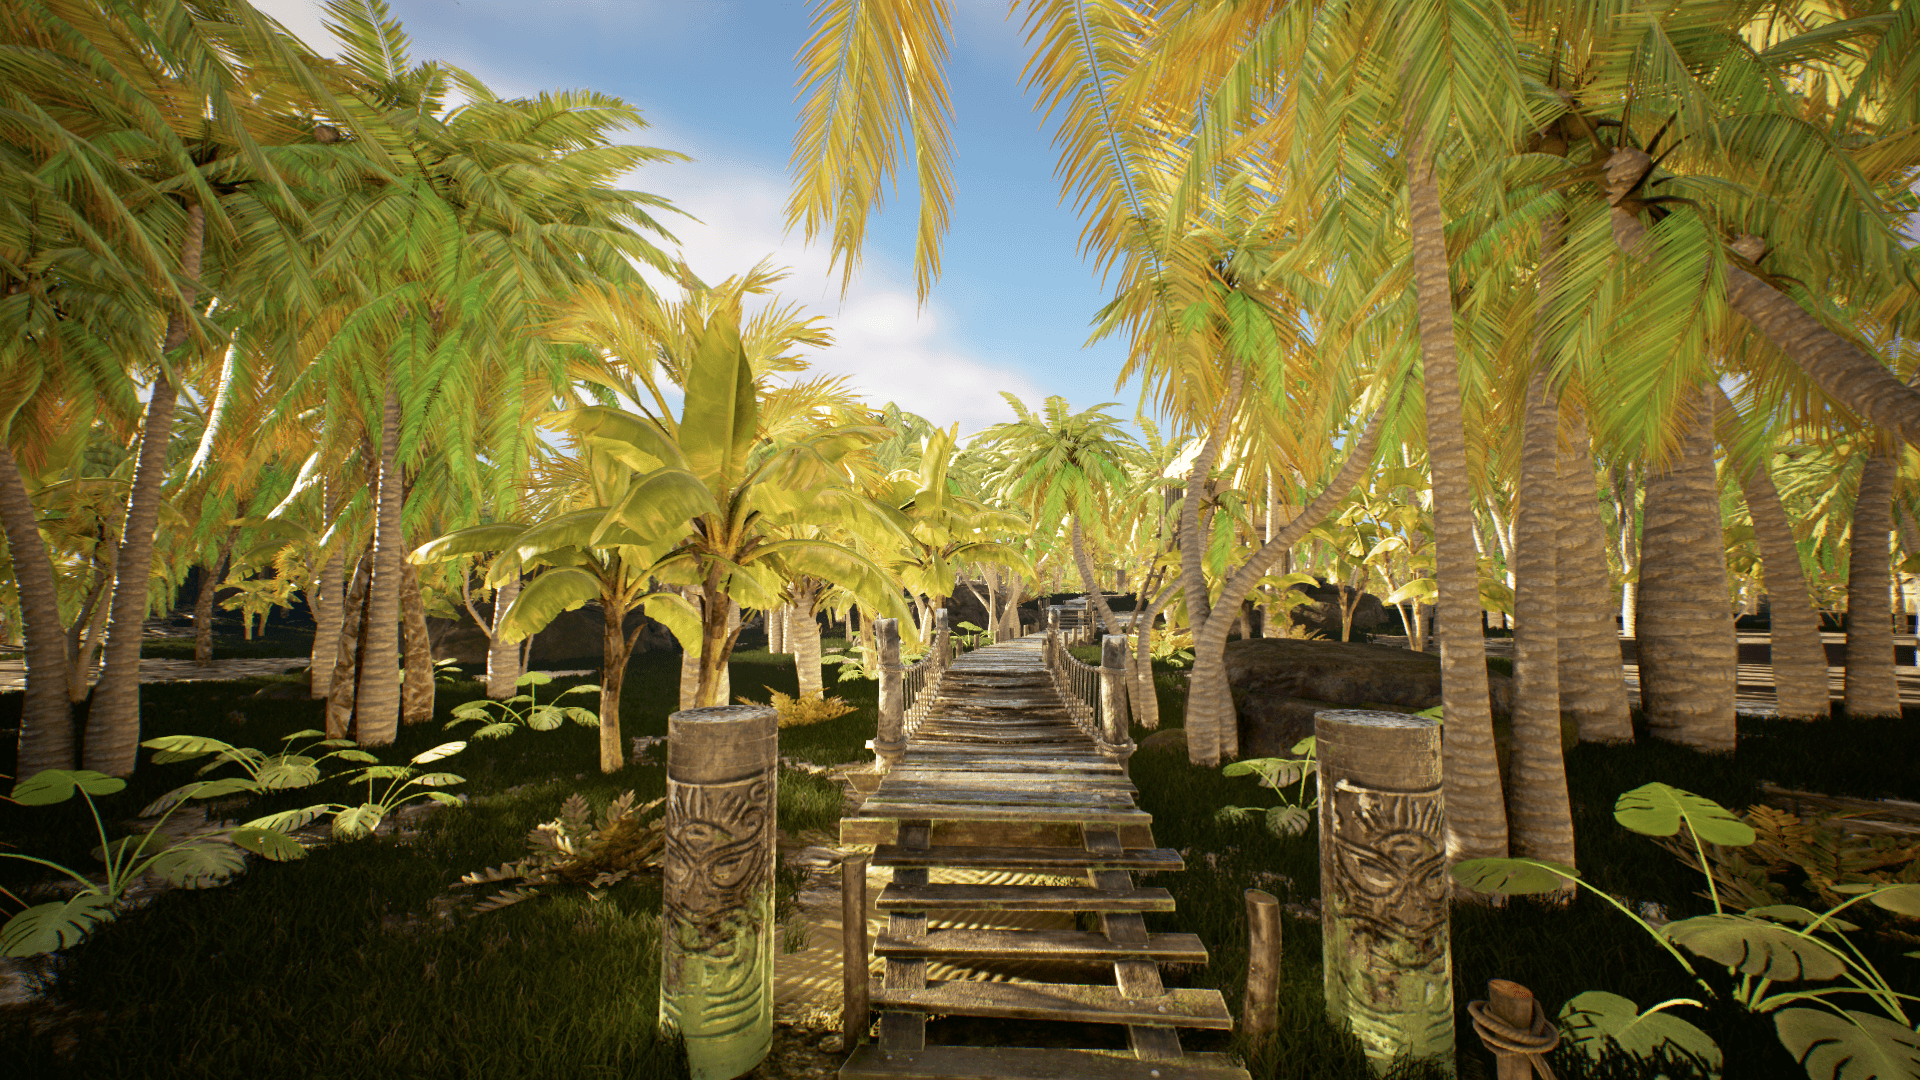 An image showing the Tropical Tiki Island asset pack, created with Unreal Engine